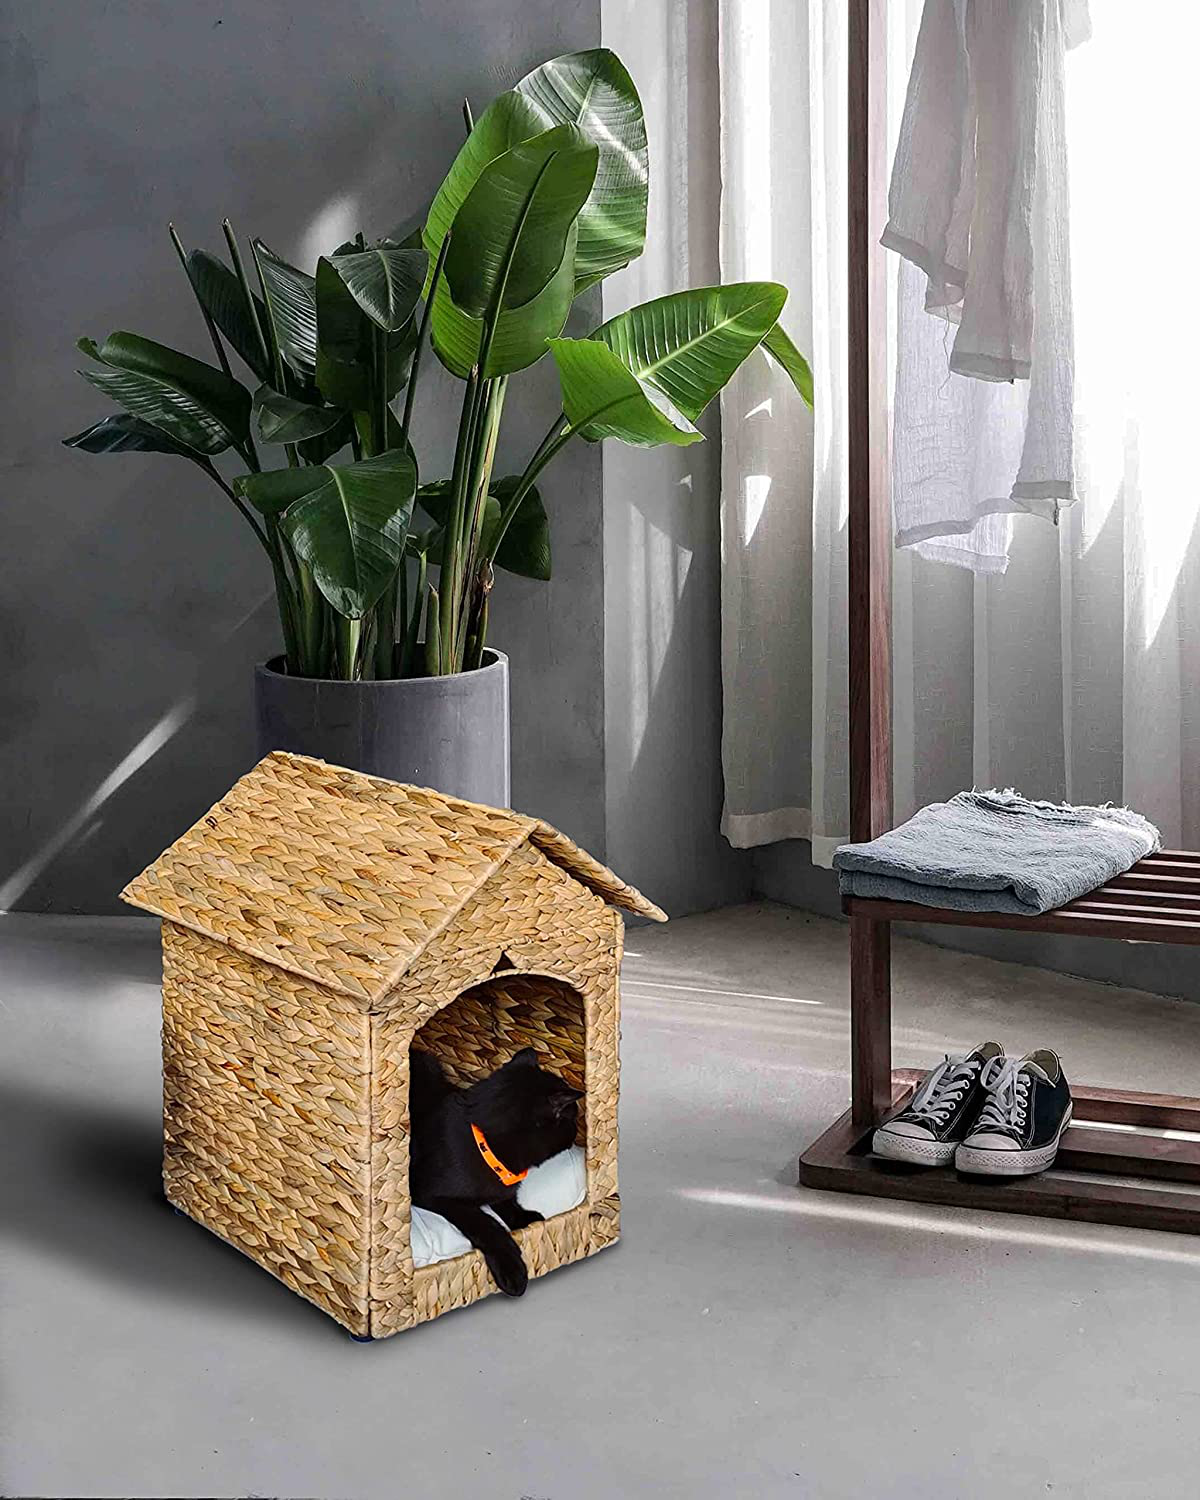 B.U.STYLE Ecofriendly Pet House Indoor, Foldable Puppy Bed, Cat Dog Housewater Hyacinth House for Indoor Used, and Natural Soft Cushion, Natural Color, 16.1Inl X 15.7W X 18.9Hin Animals & Pet Supplies > Pet Supplies > Dog Supplies > Dog Houses B.U.STYLE   